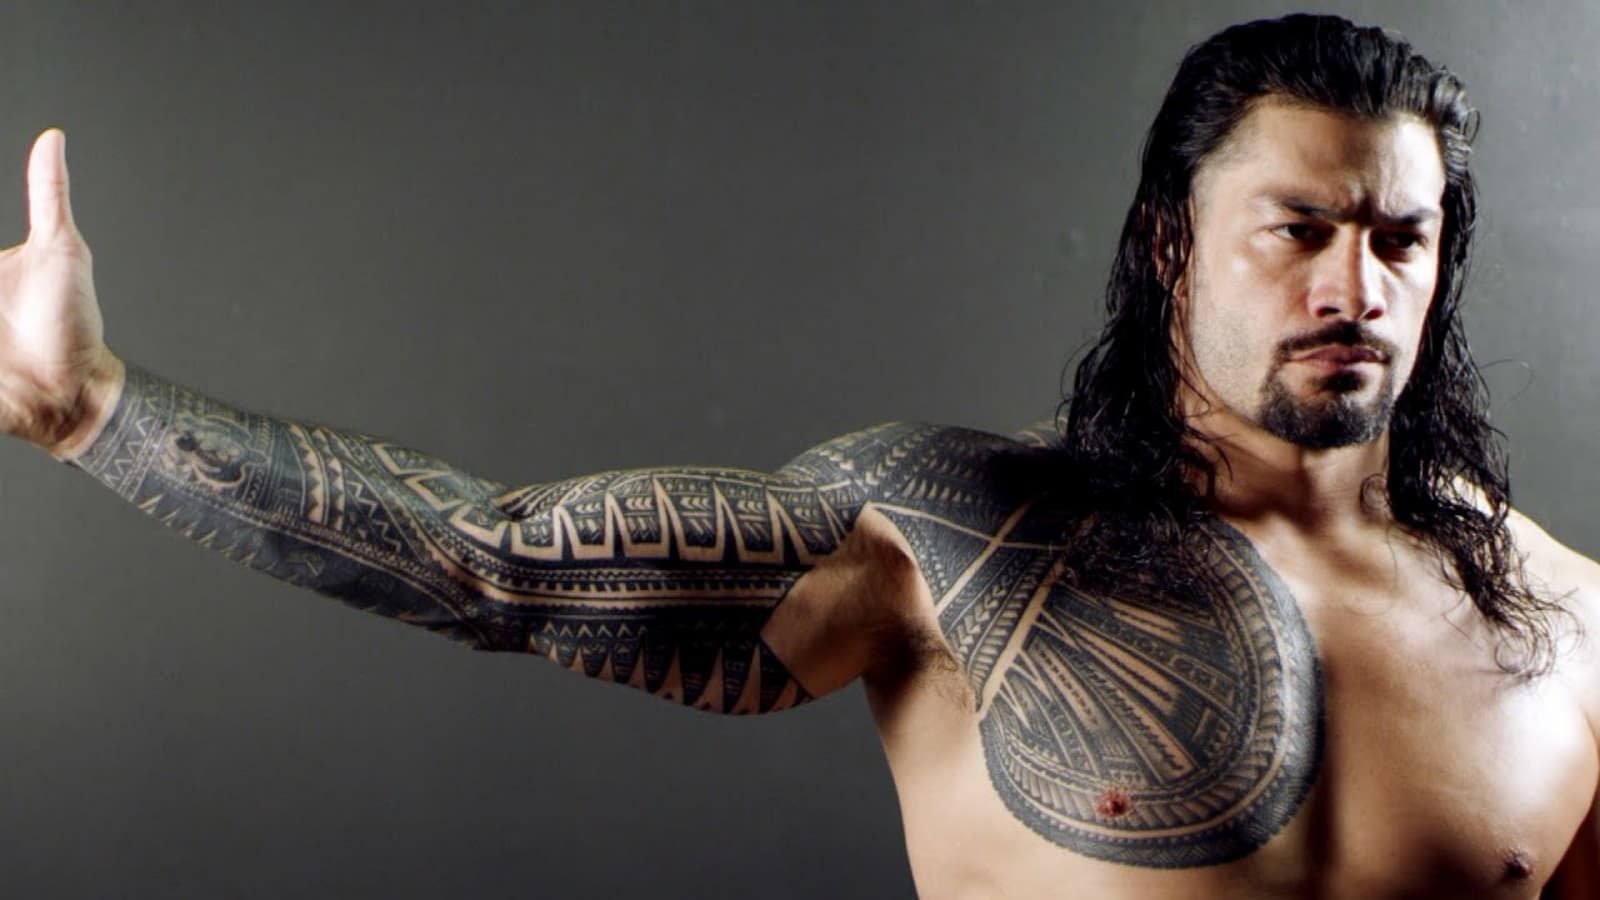 The Rock, Roman Reigns & Their Relatives: The Full WWE Bloodline Family  Tree Explained - Page 6 of 10 - WrestleTalk